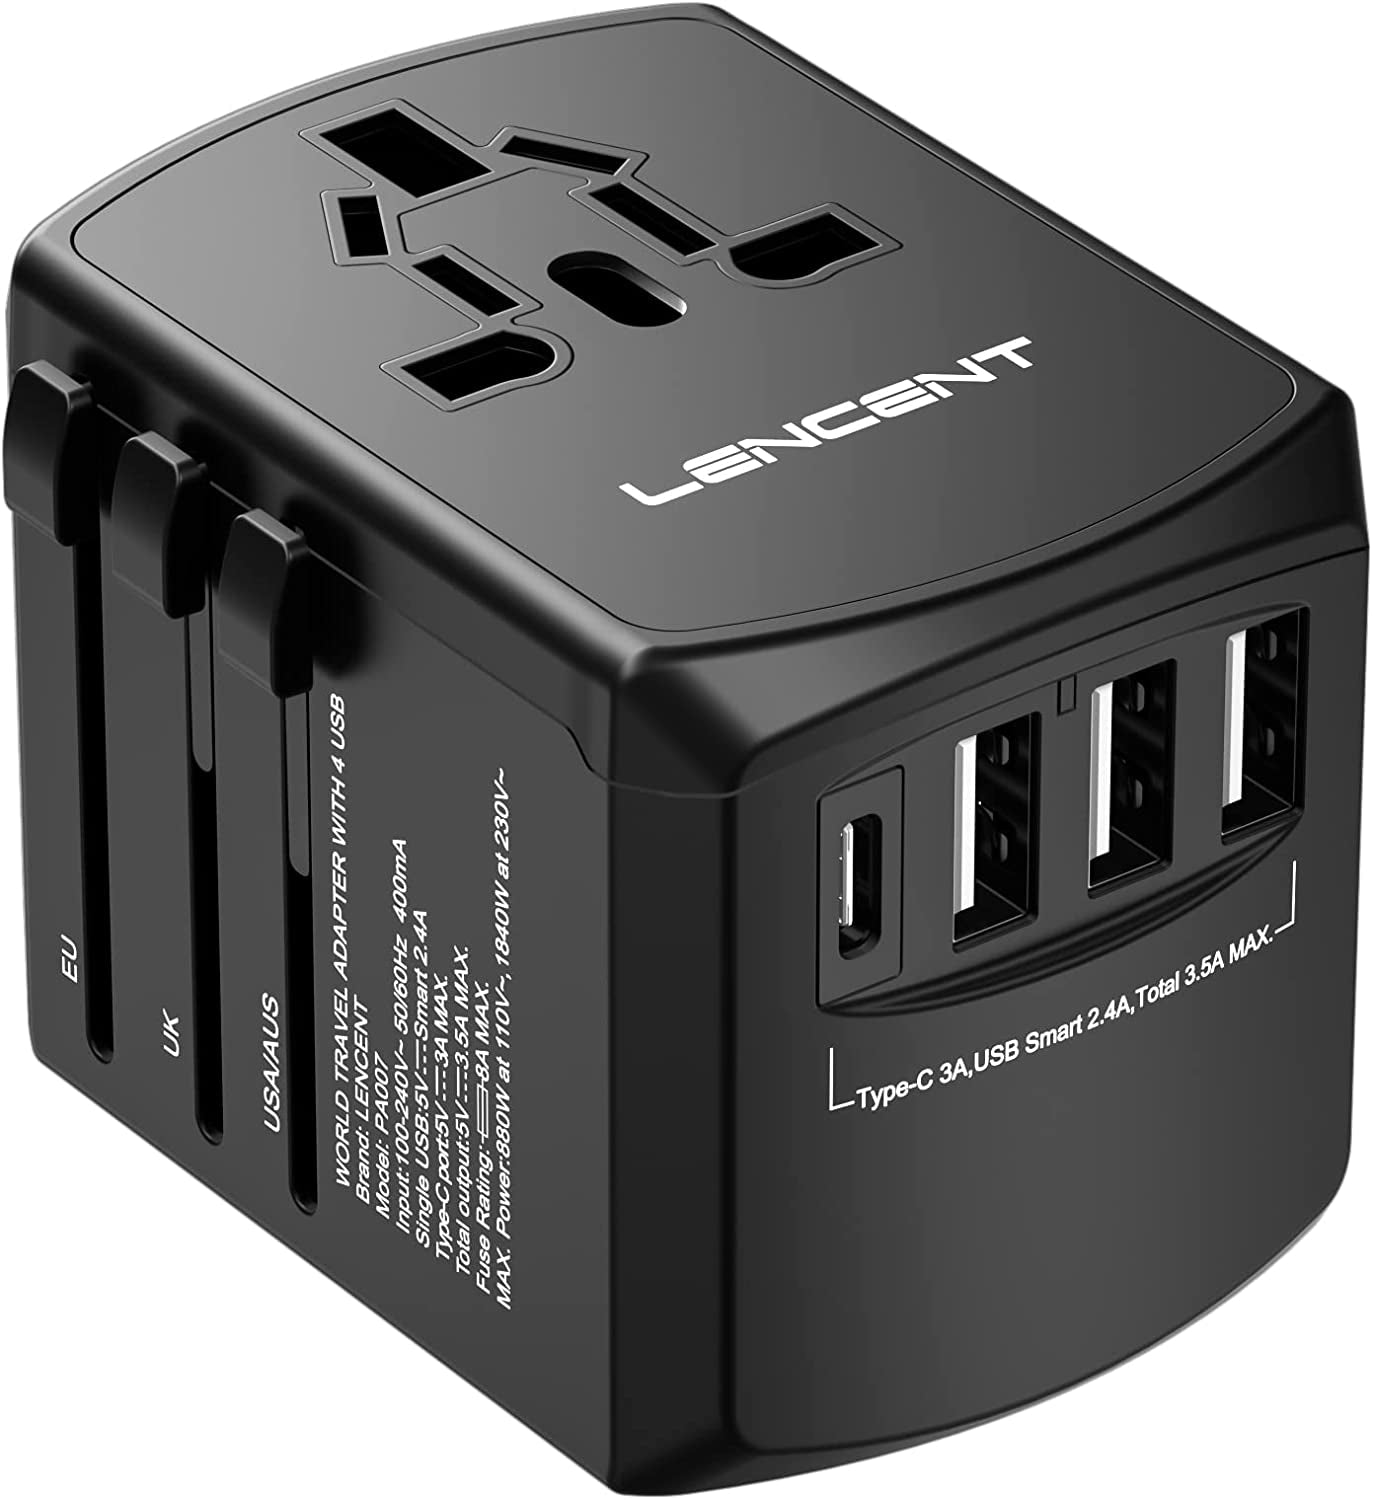 LENCENT, LENCENT Universal Travel Adapter, International Charger with 3 USB Ports and Type-C PD Fast Charging Adaptor for Iphone, Samsung, Tablet, Gopro. for over 200 Countries Type A/C/G/ I (USA, UK, EU AUS)